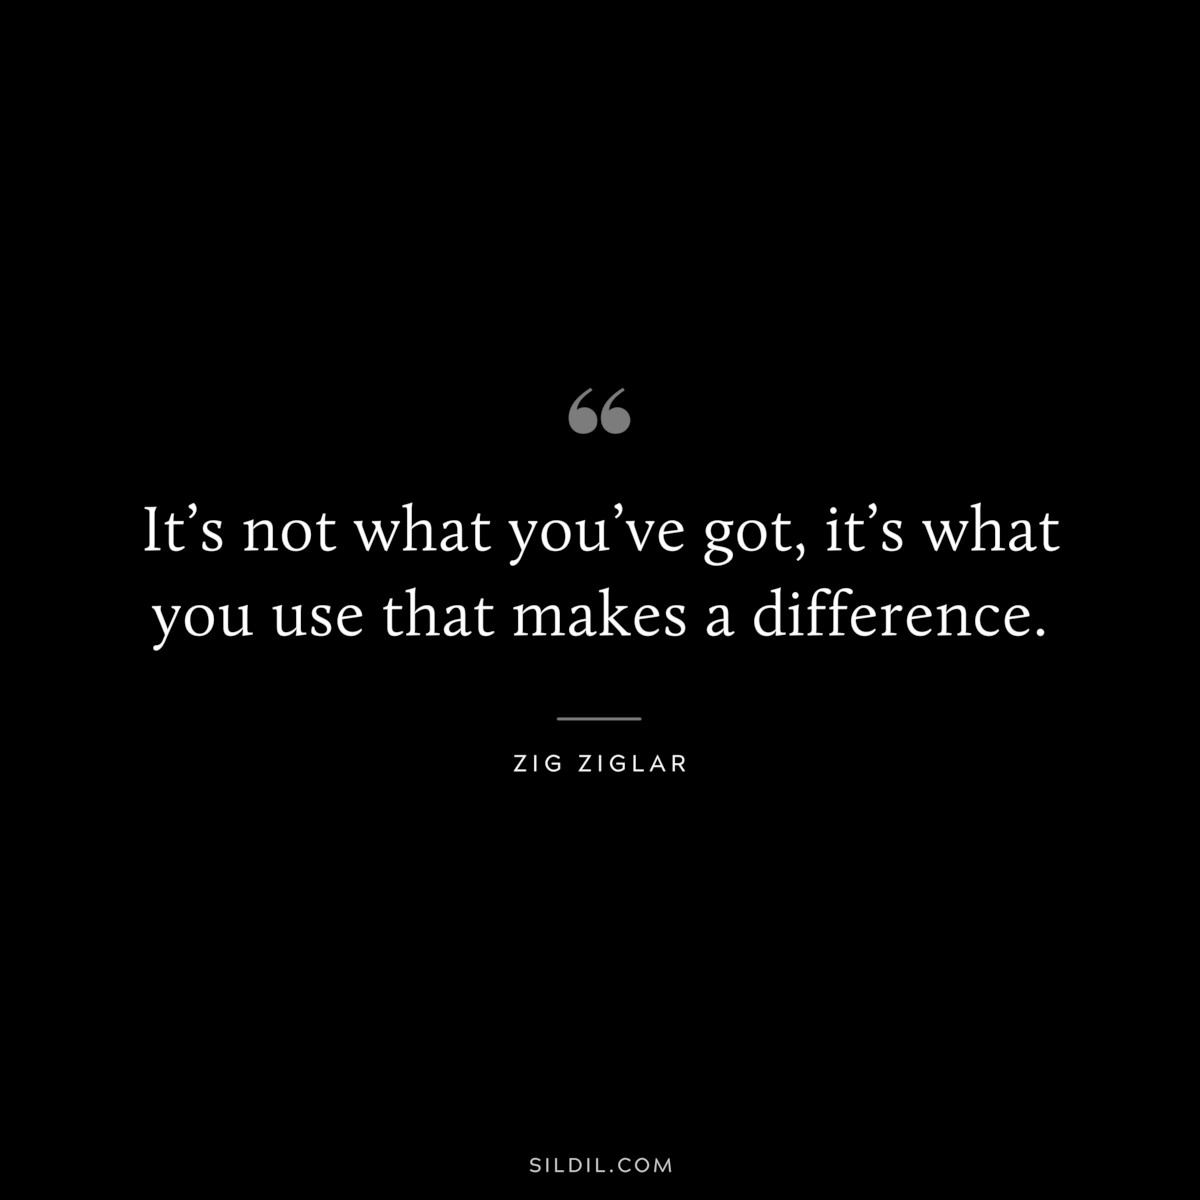 It’s not what you’ve got, it’s what you use that makes a difference. ― Zig Ziglar